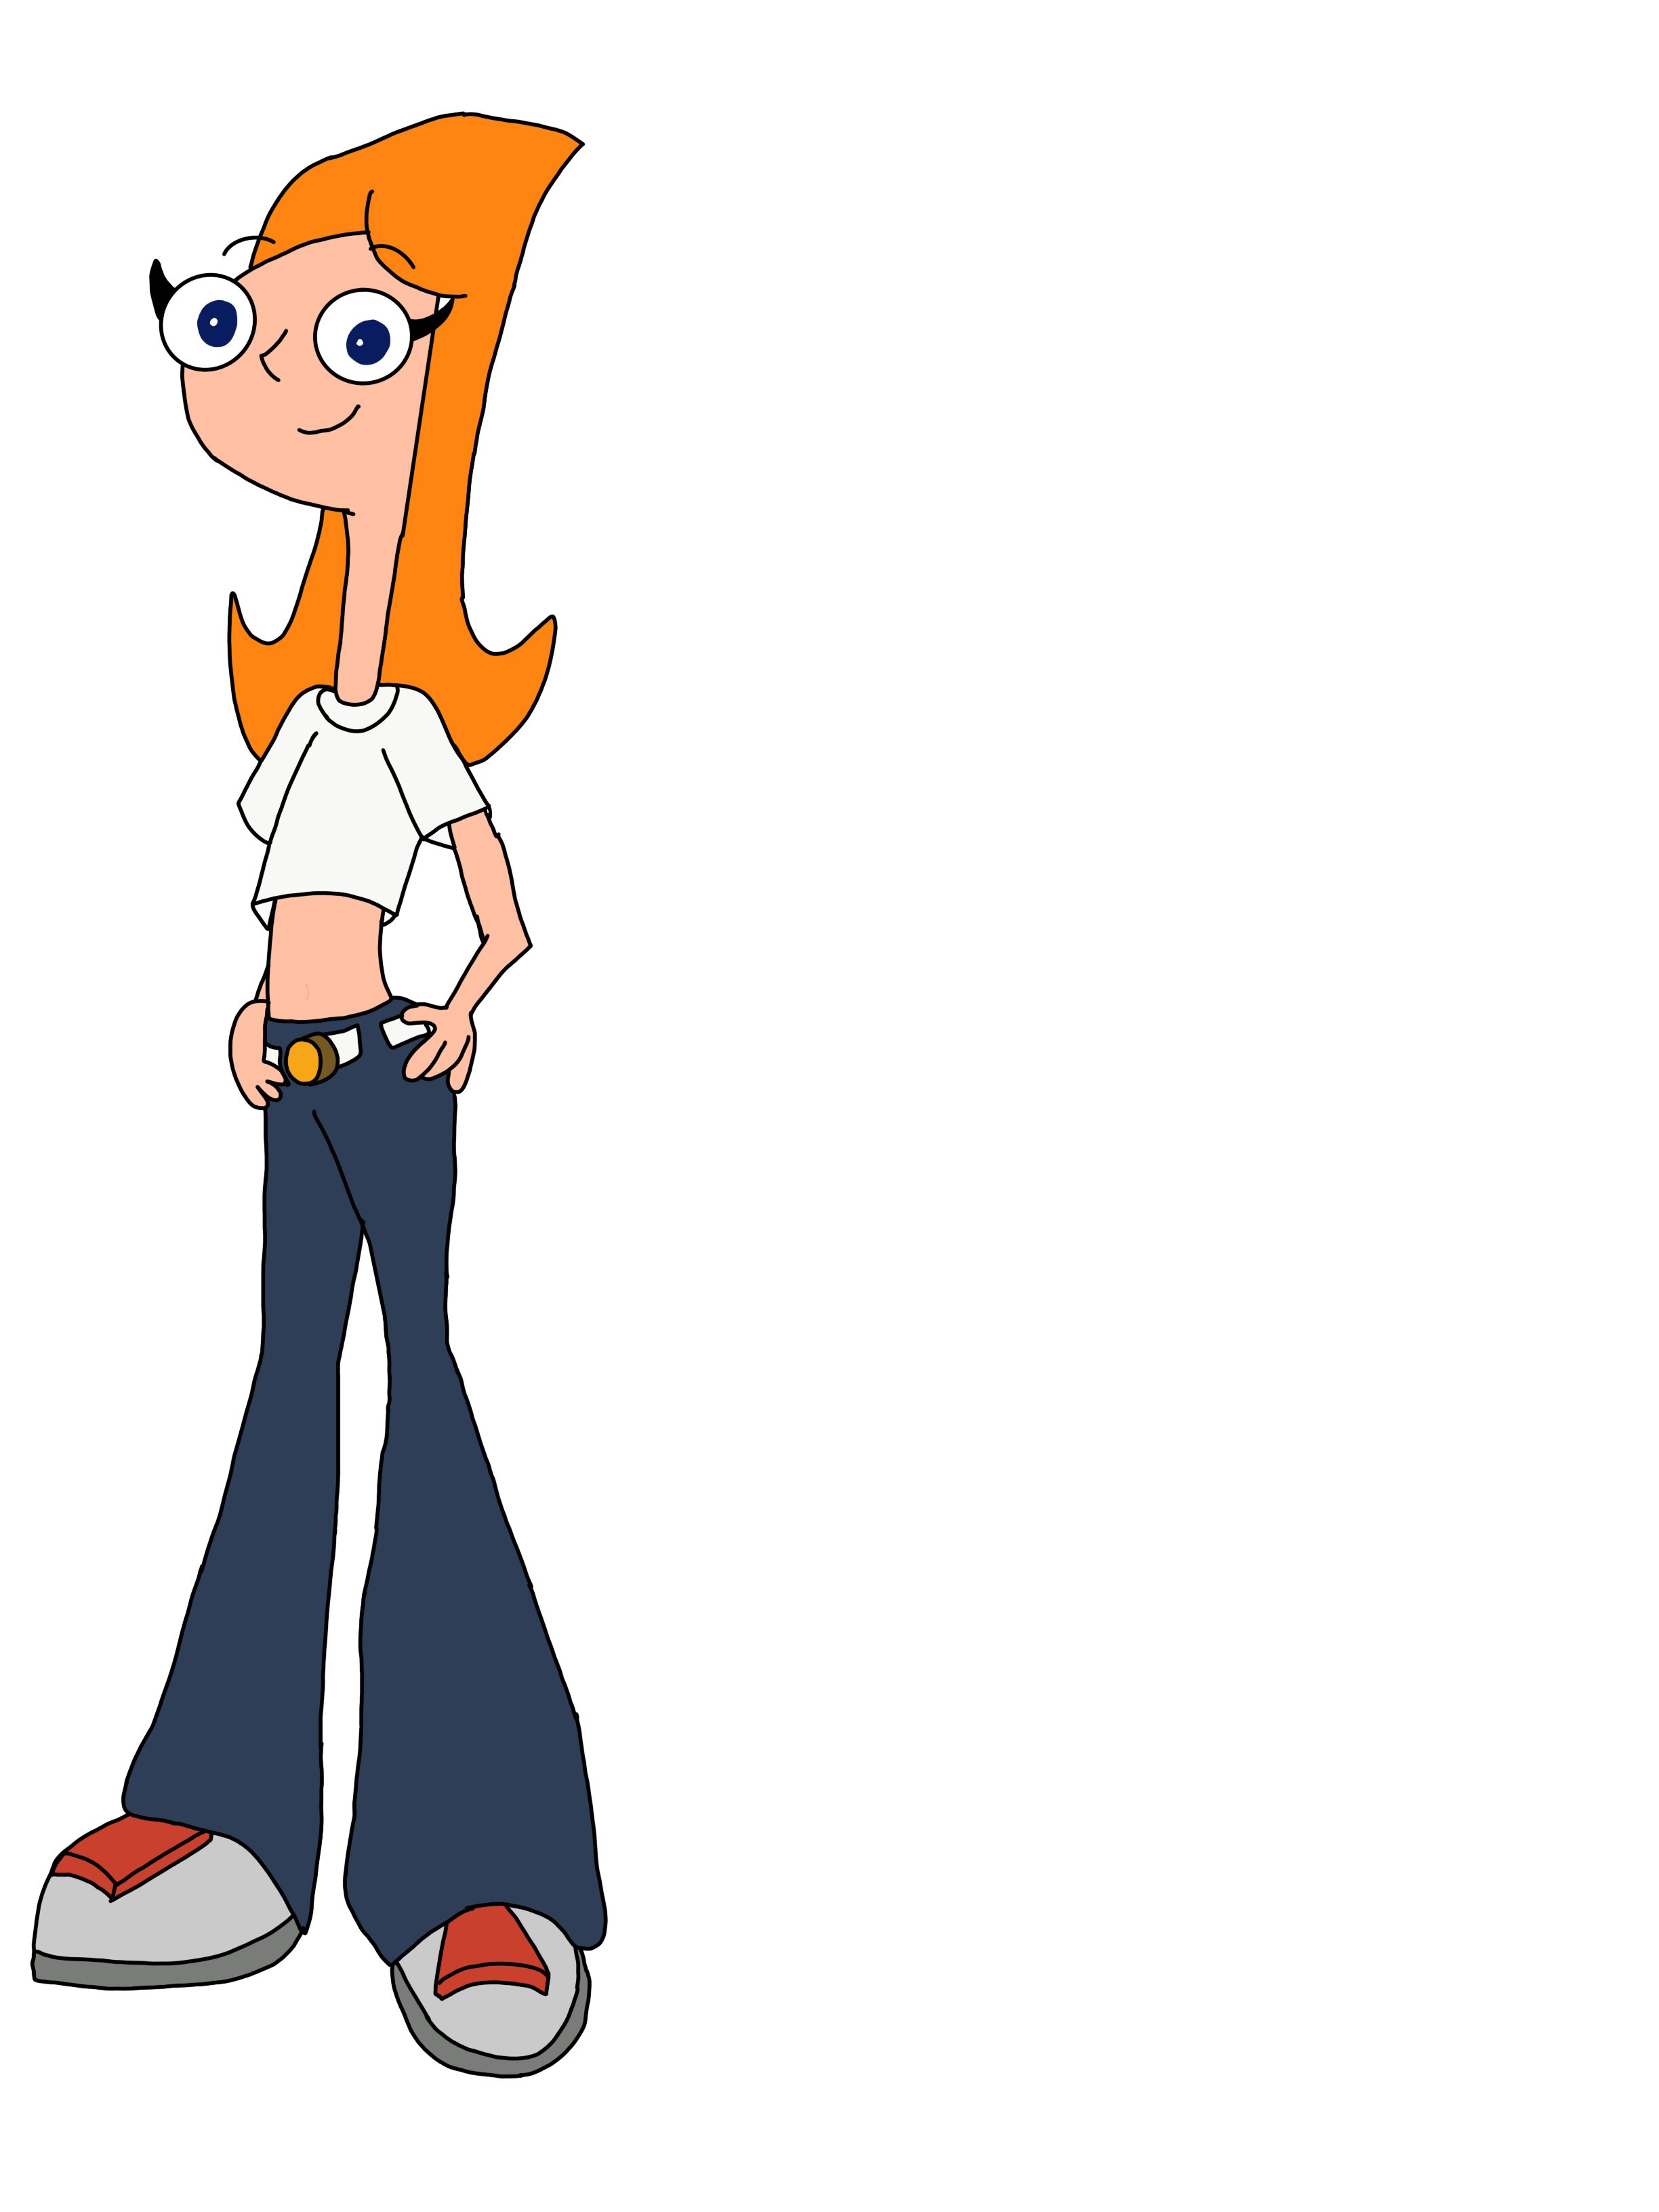 Candace Flynn (S.I.M.P. outfit) Official by Cherryboi2000 on DeviantArt